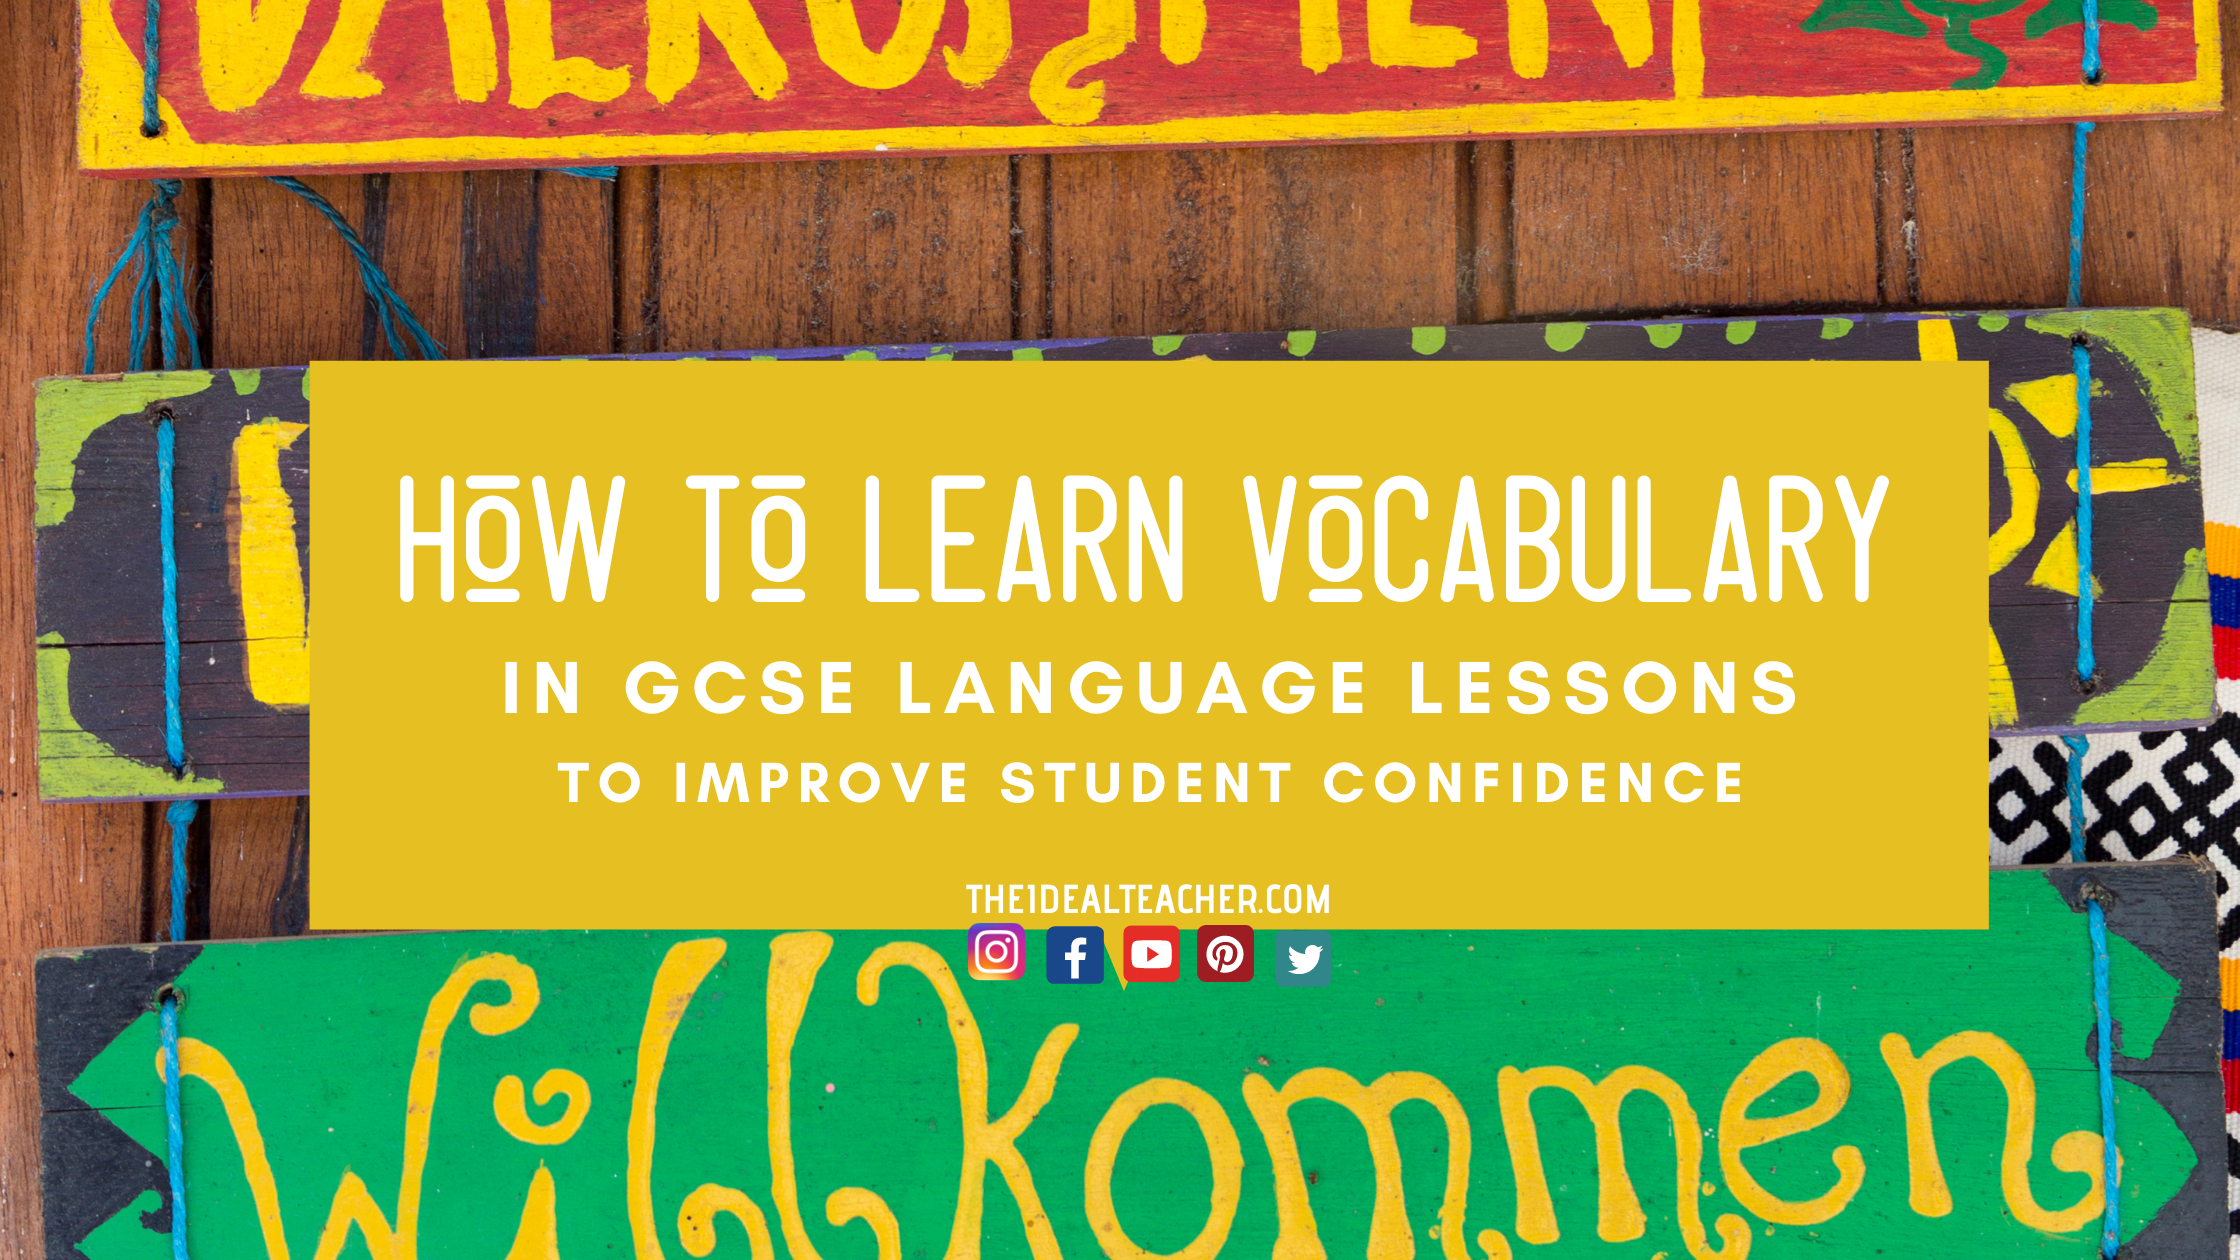 How To Learn Vocabulary & Boost Students’ Confidence in Language Lessons